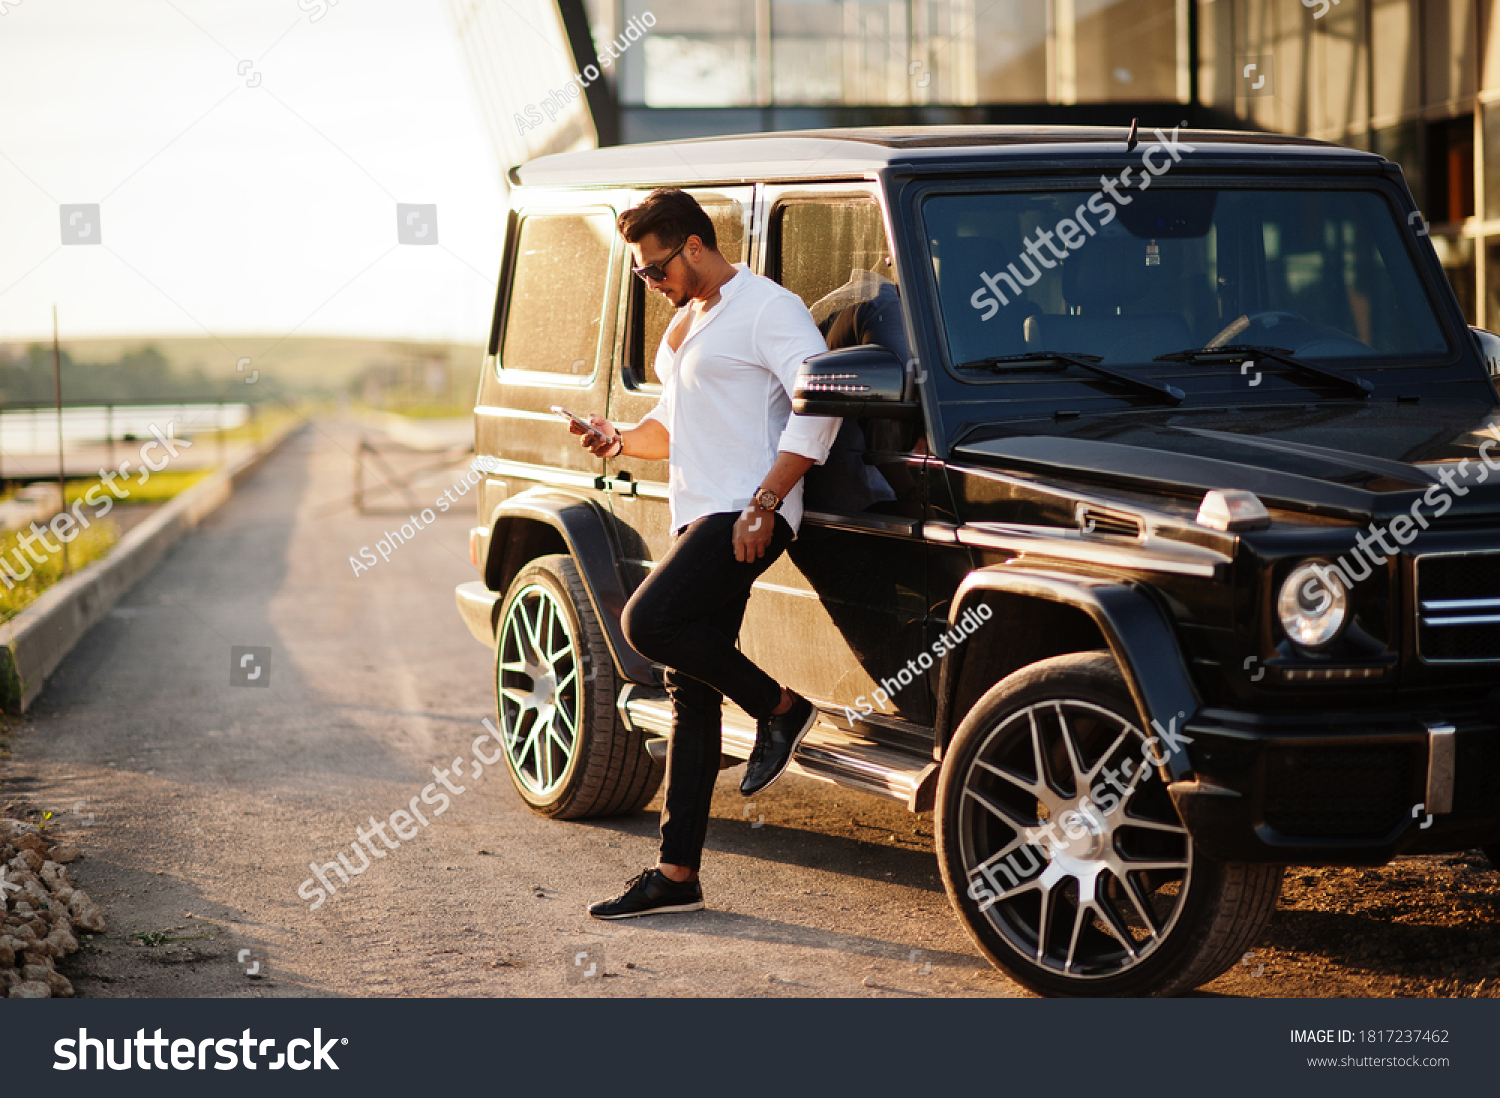 93,419 Rich white man Stock Photos, Images & Photography | Shutterstock